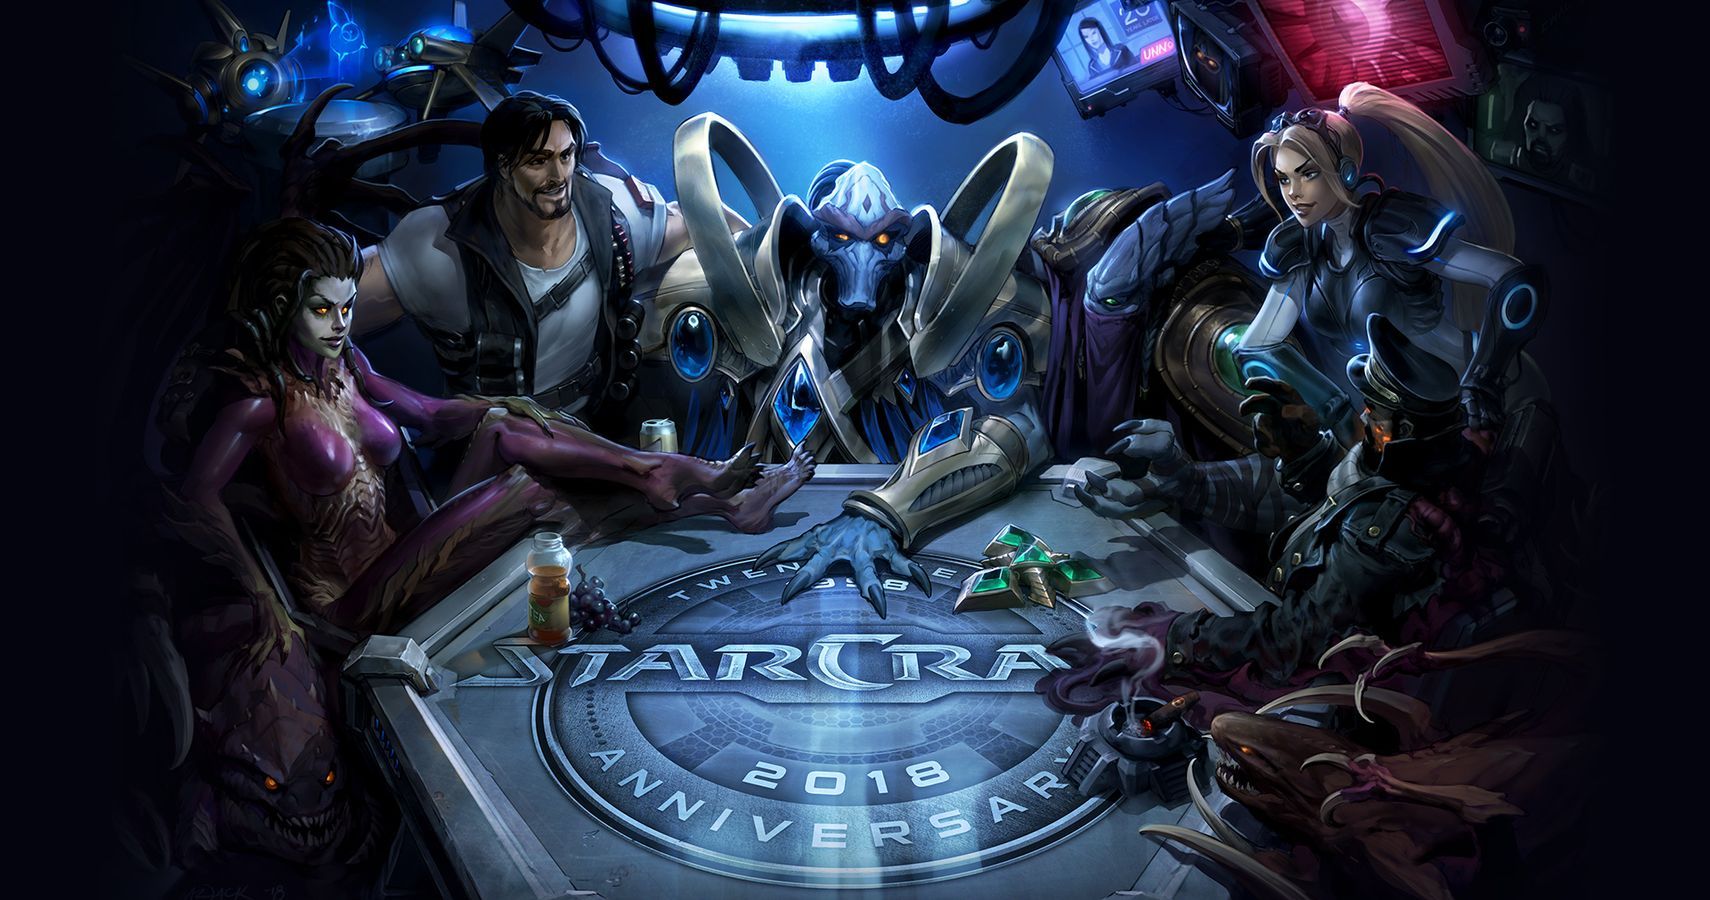 8 Predictions We Have About The StarCraft 3 Video Game